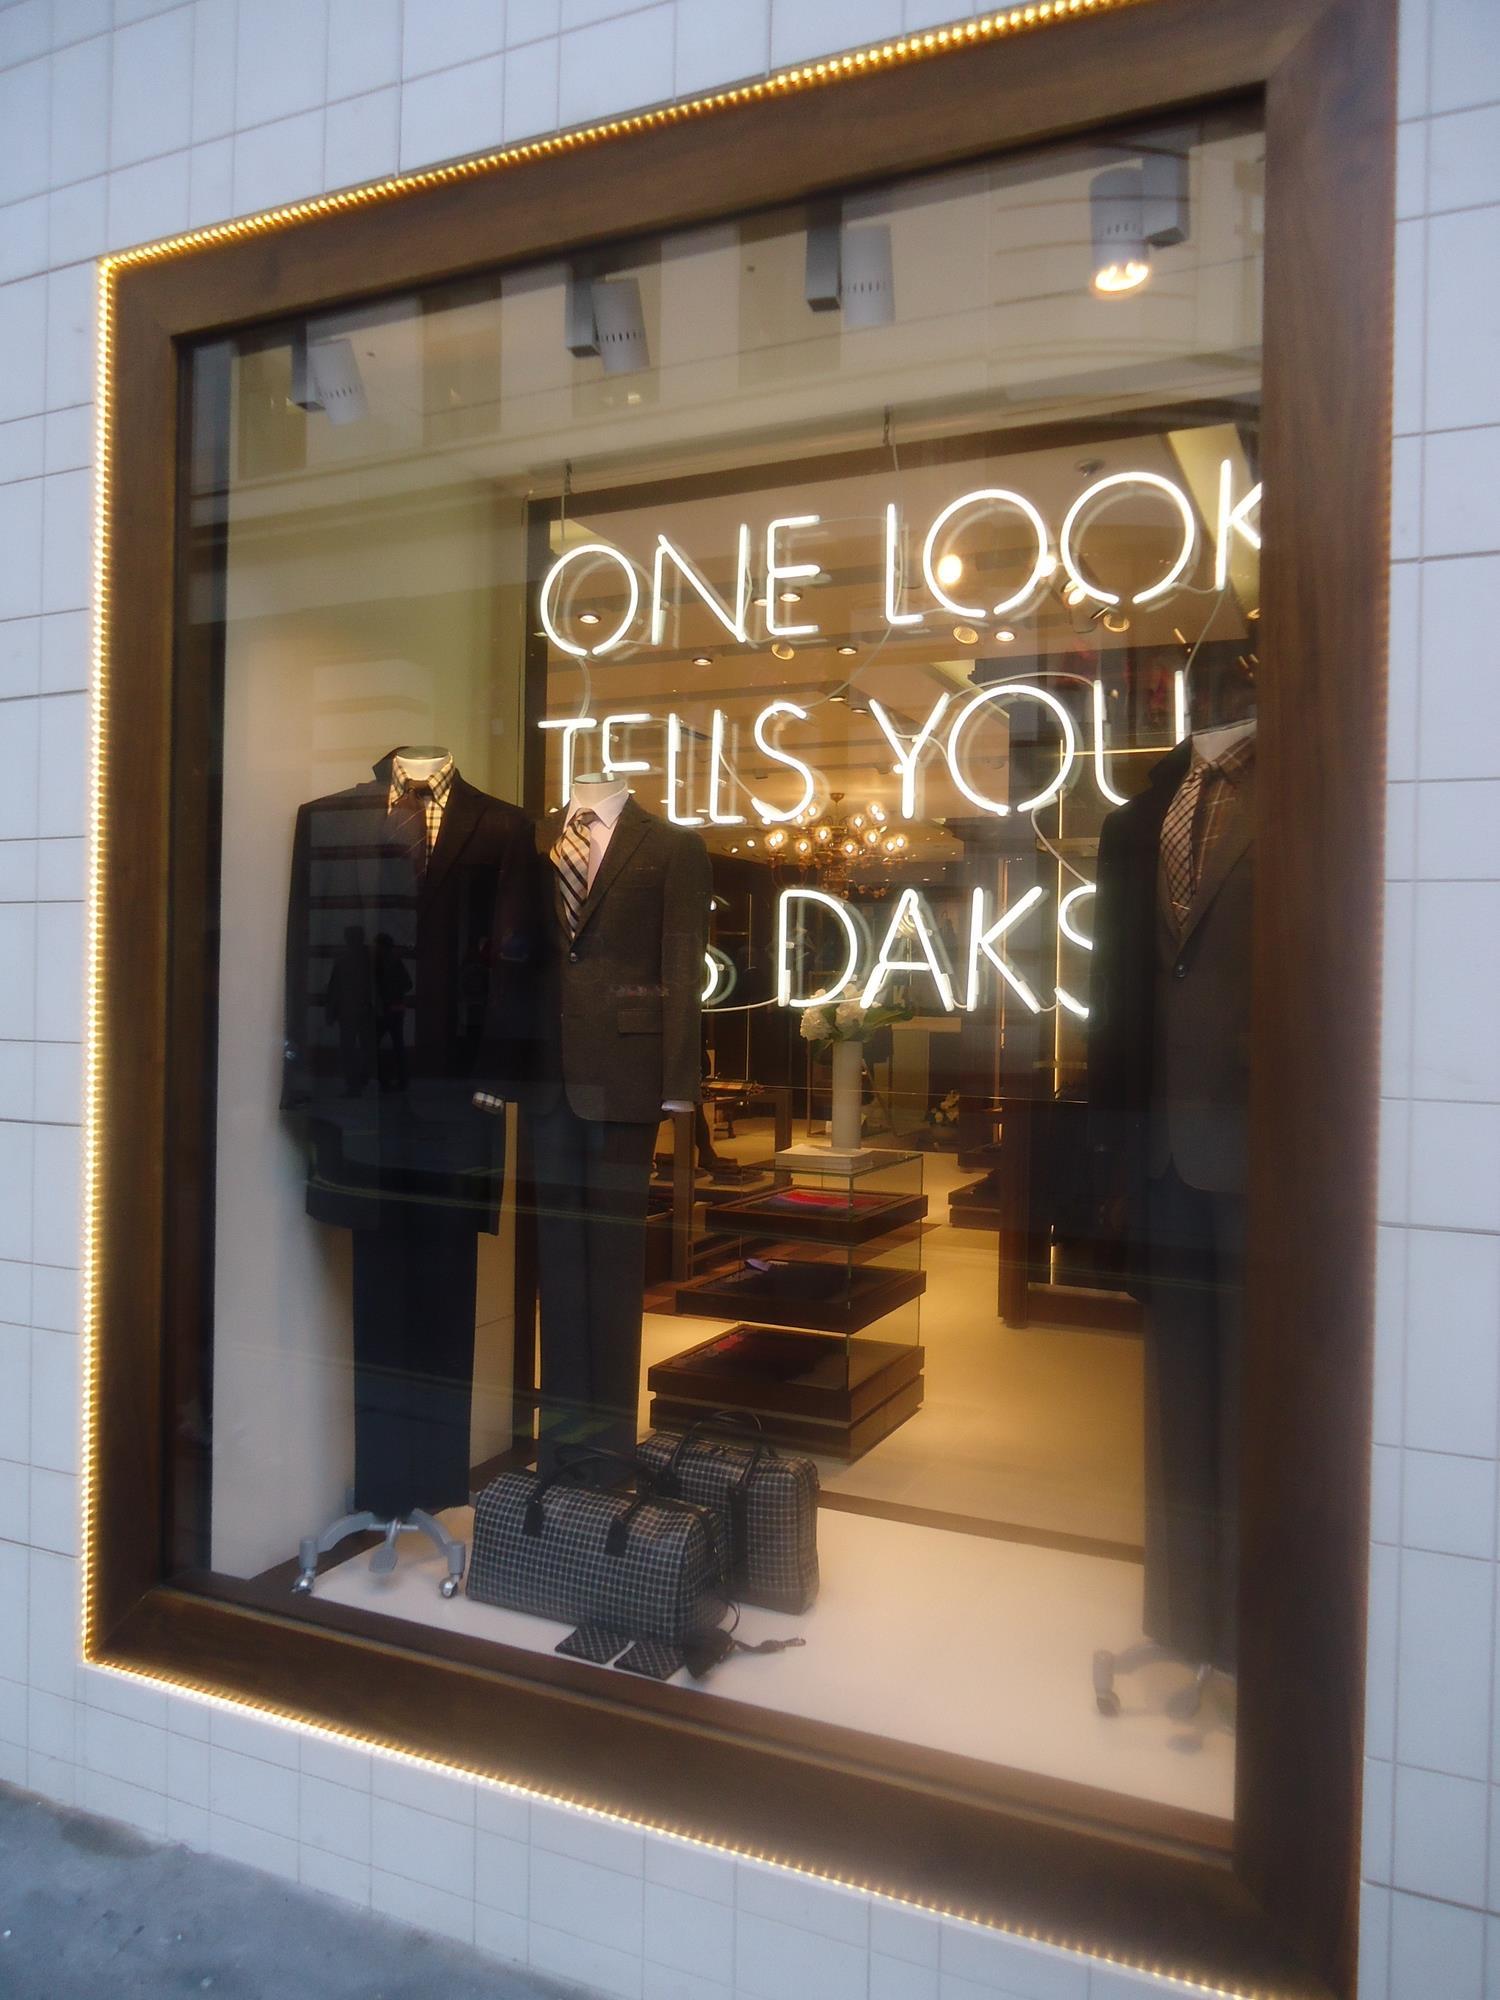 Store gallery: A new look for classic brand Daks | Photo gallery ...